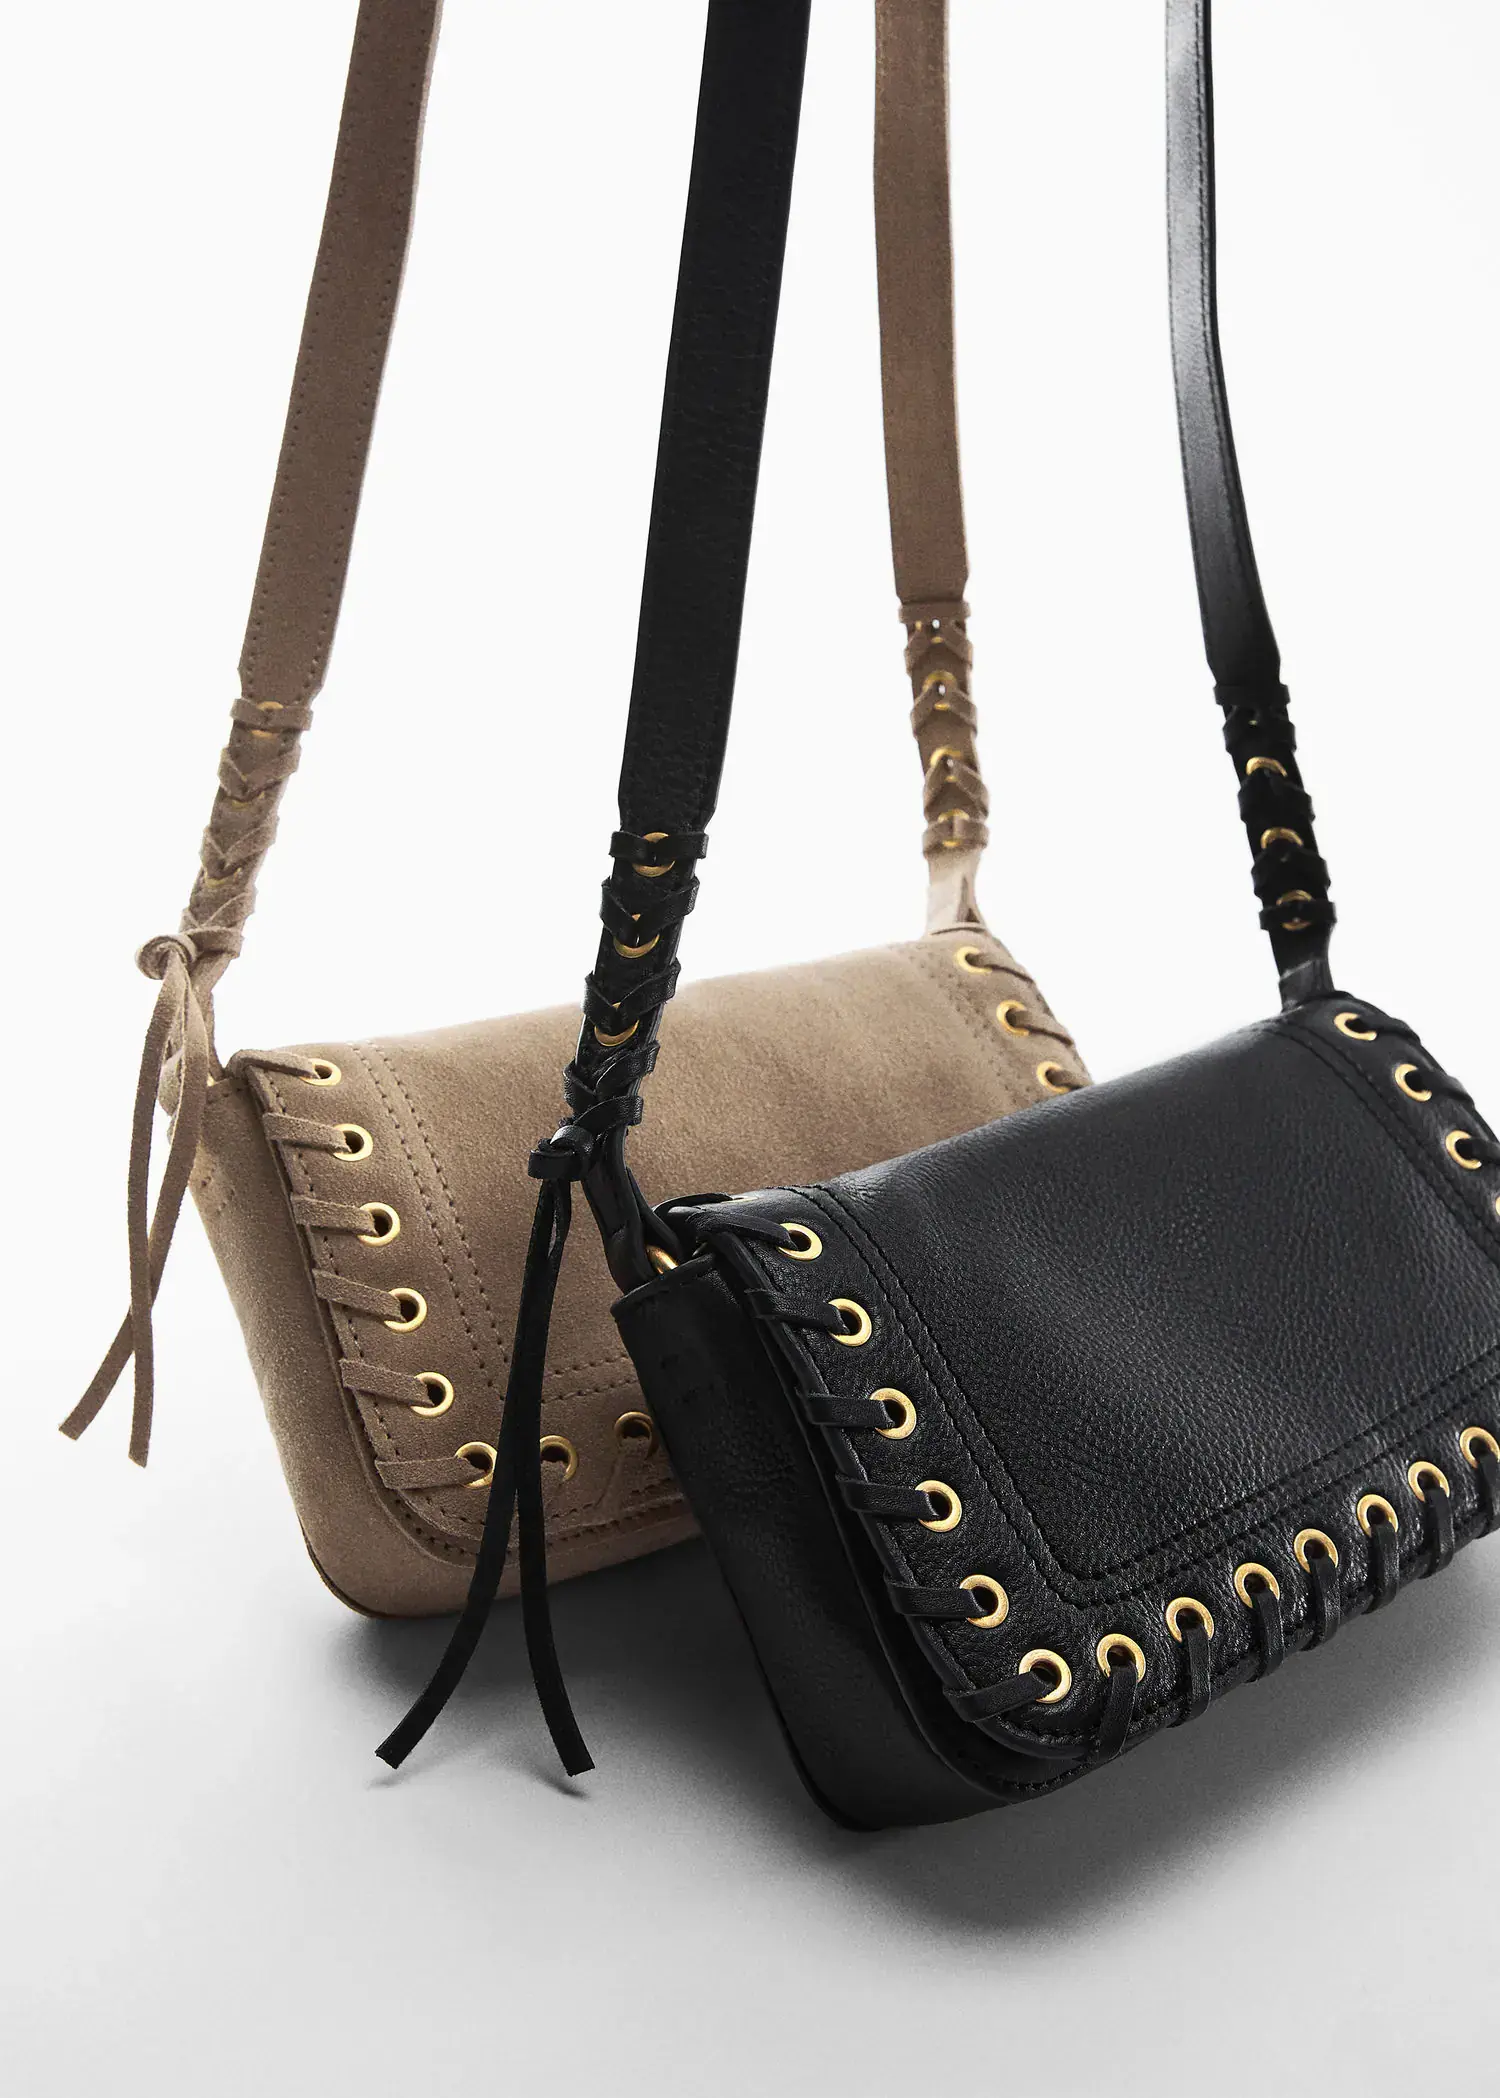 Mango Stud leather bag. a pair of black and tan bags sitting next to each other. 